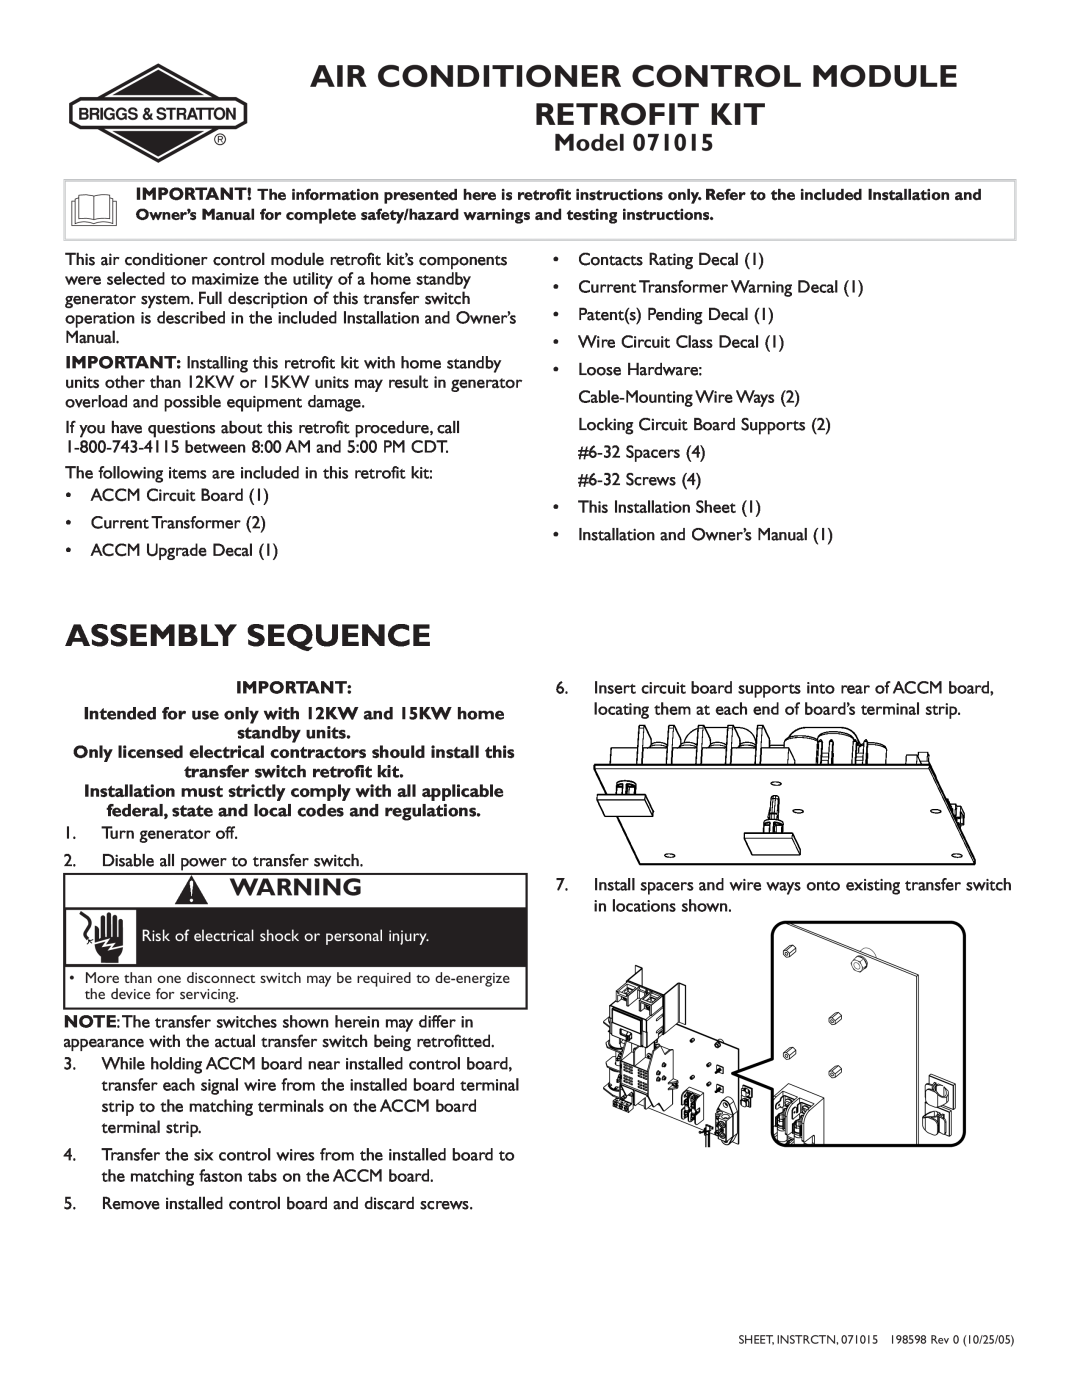 Briggs & Stratton 071015 owner manual Intended for use only with 12KW and 15KW home, standby units, Assembly Sequence 